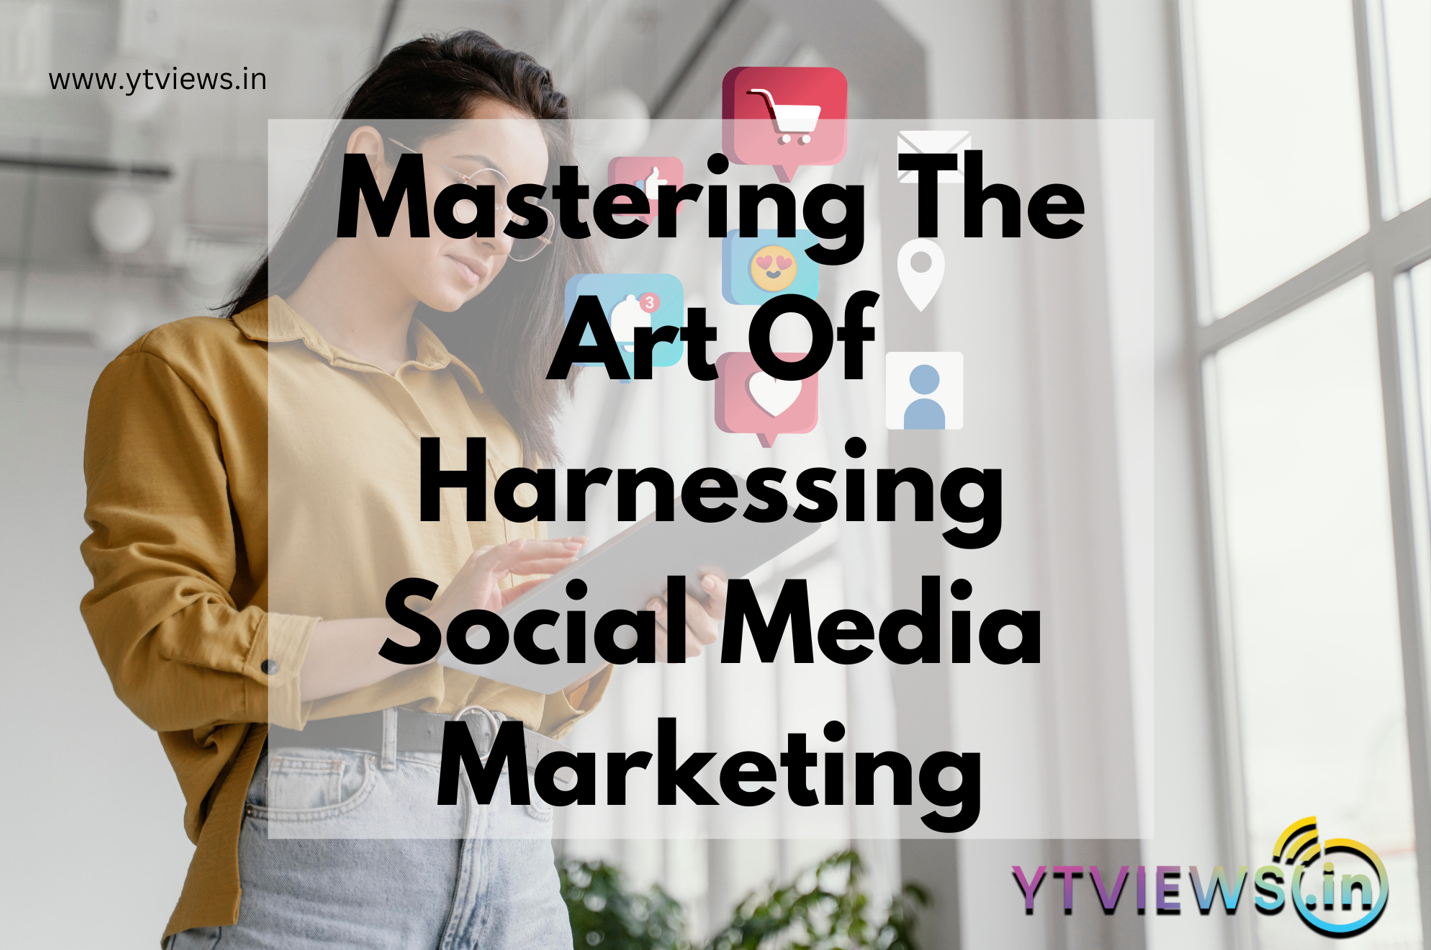 Mastering the art of harnessing social media marketing to achieve competitive edge